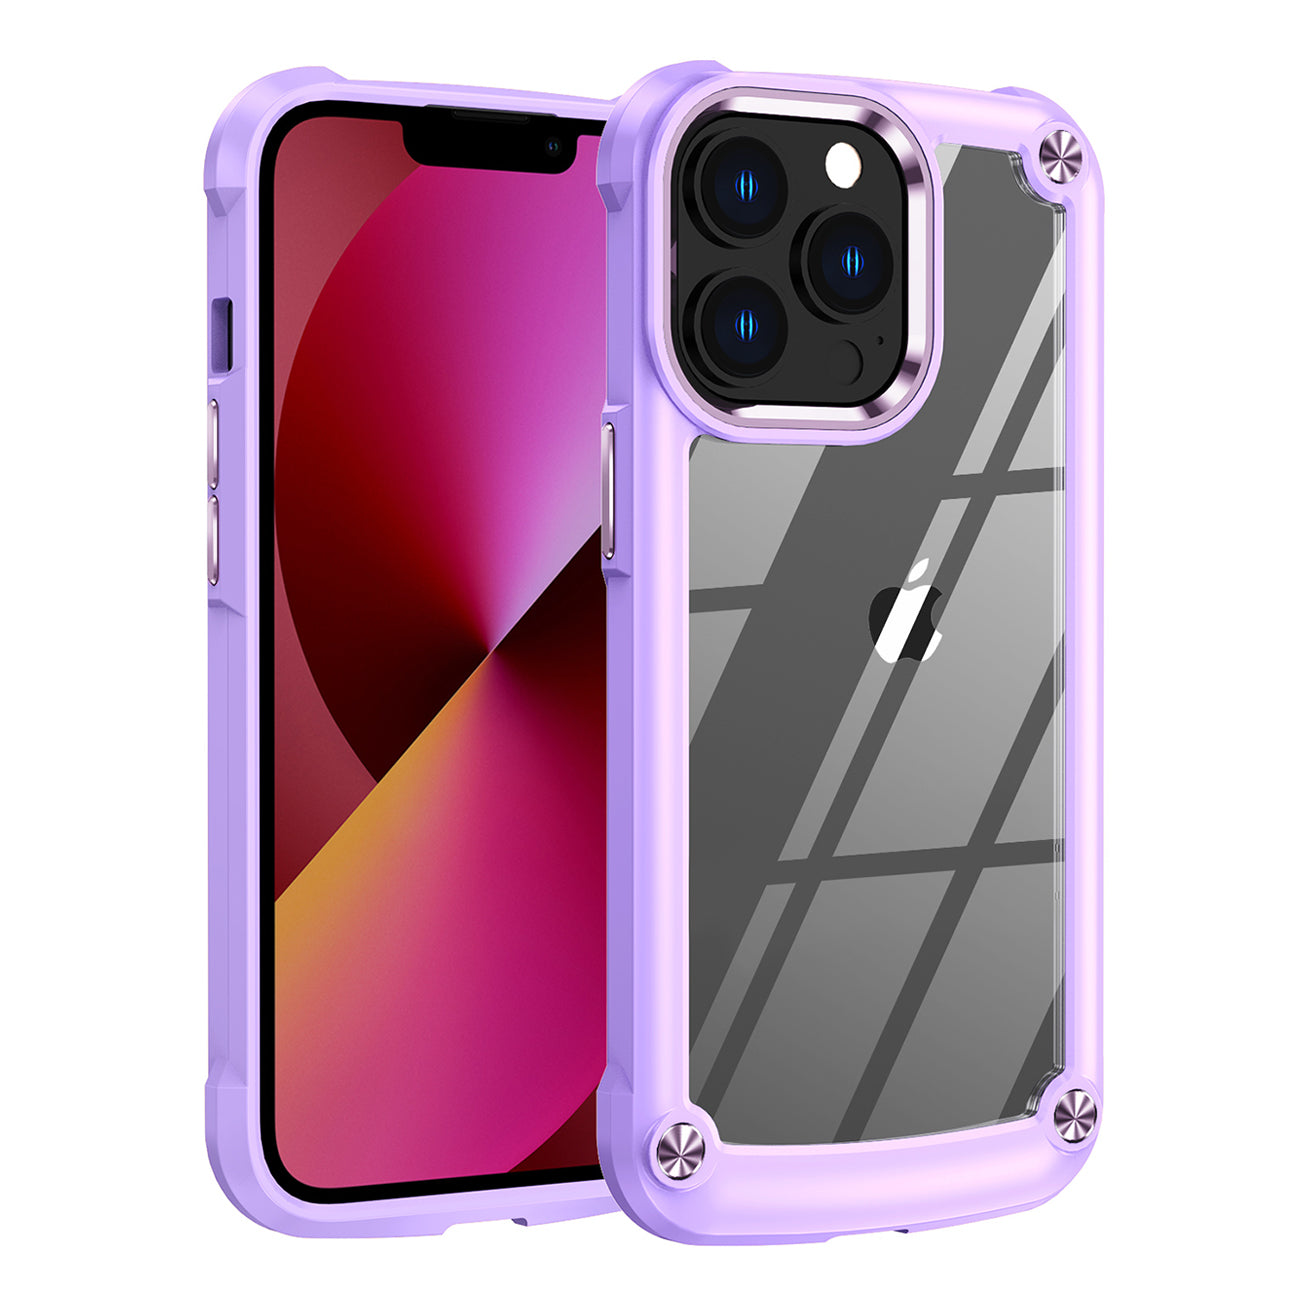 High Quality Clean PC,TPU and Metal Bumper Case For iPhone 13 PRO In Purple